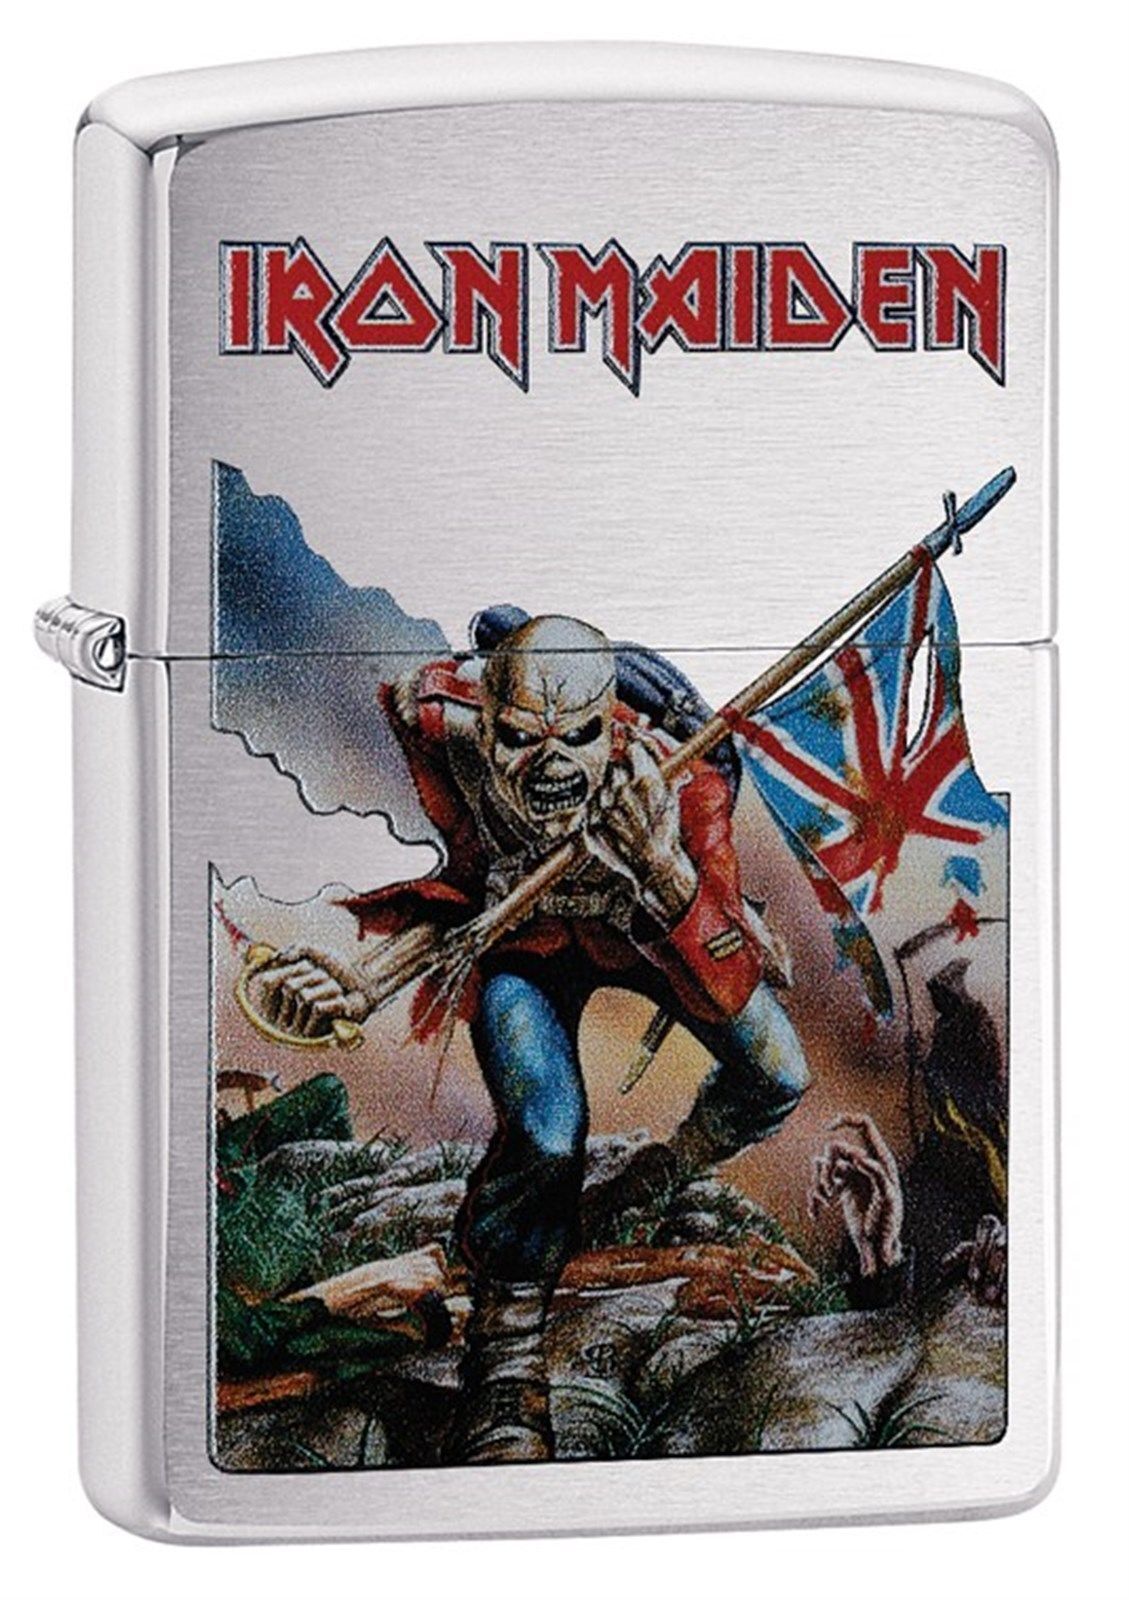 Zippo Windproof Lighter With Iron Maiden Logo and Design, 29432, New In Box